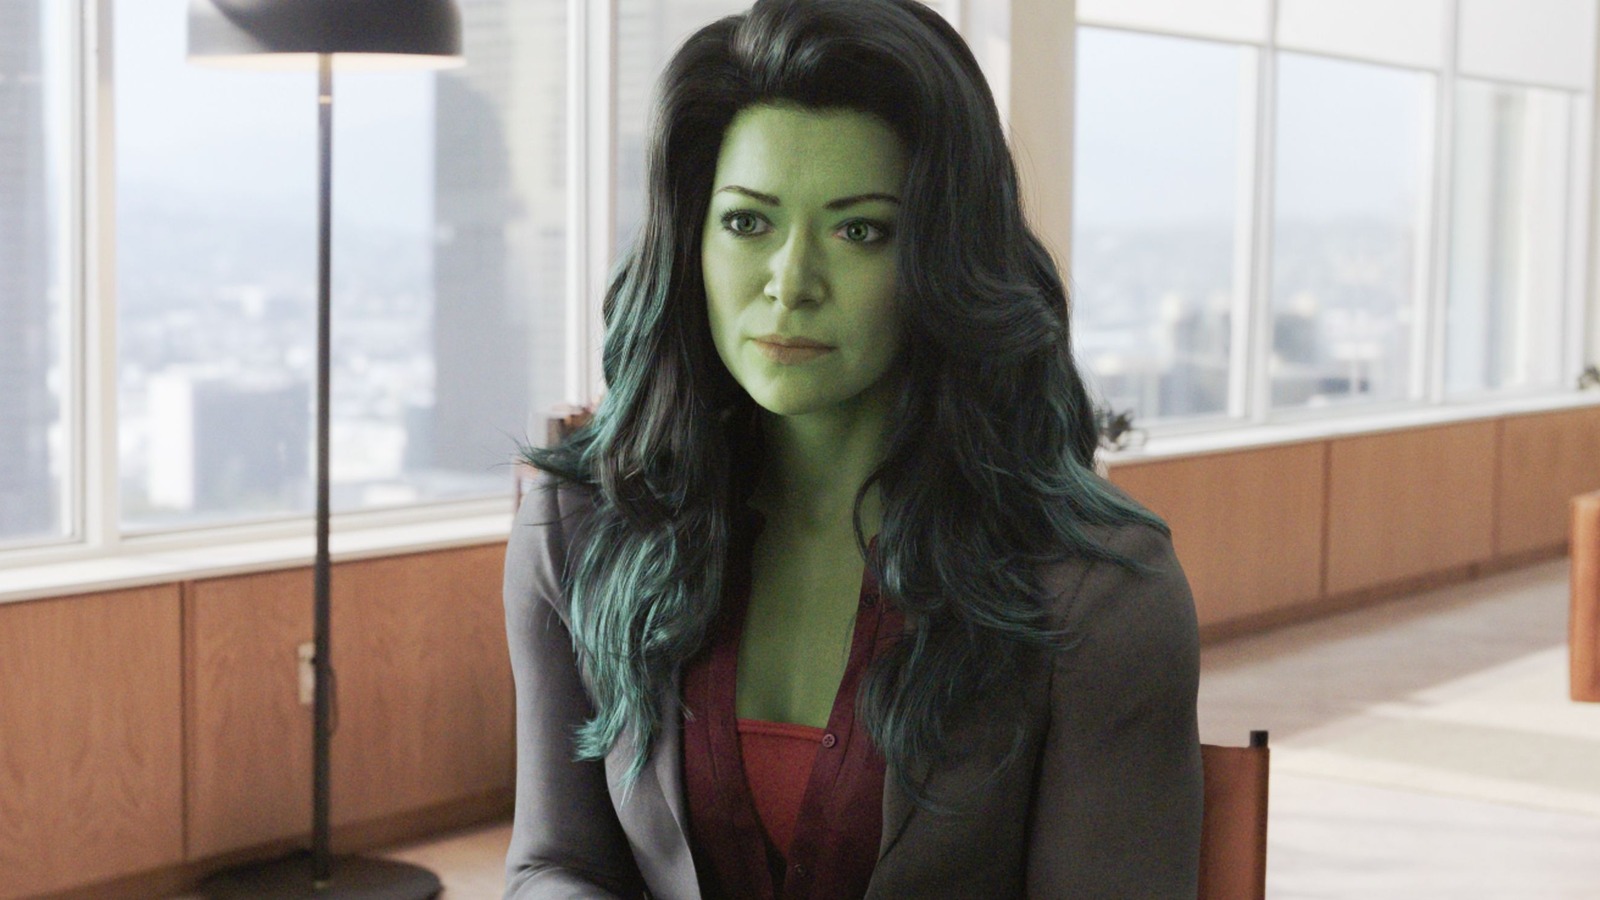 She-Hulk': Three Marvel movies (and one TV show) to revisit before